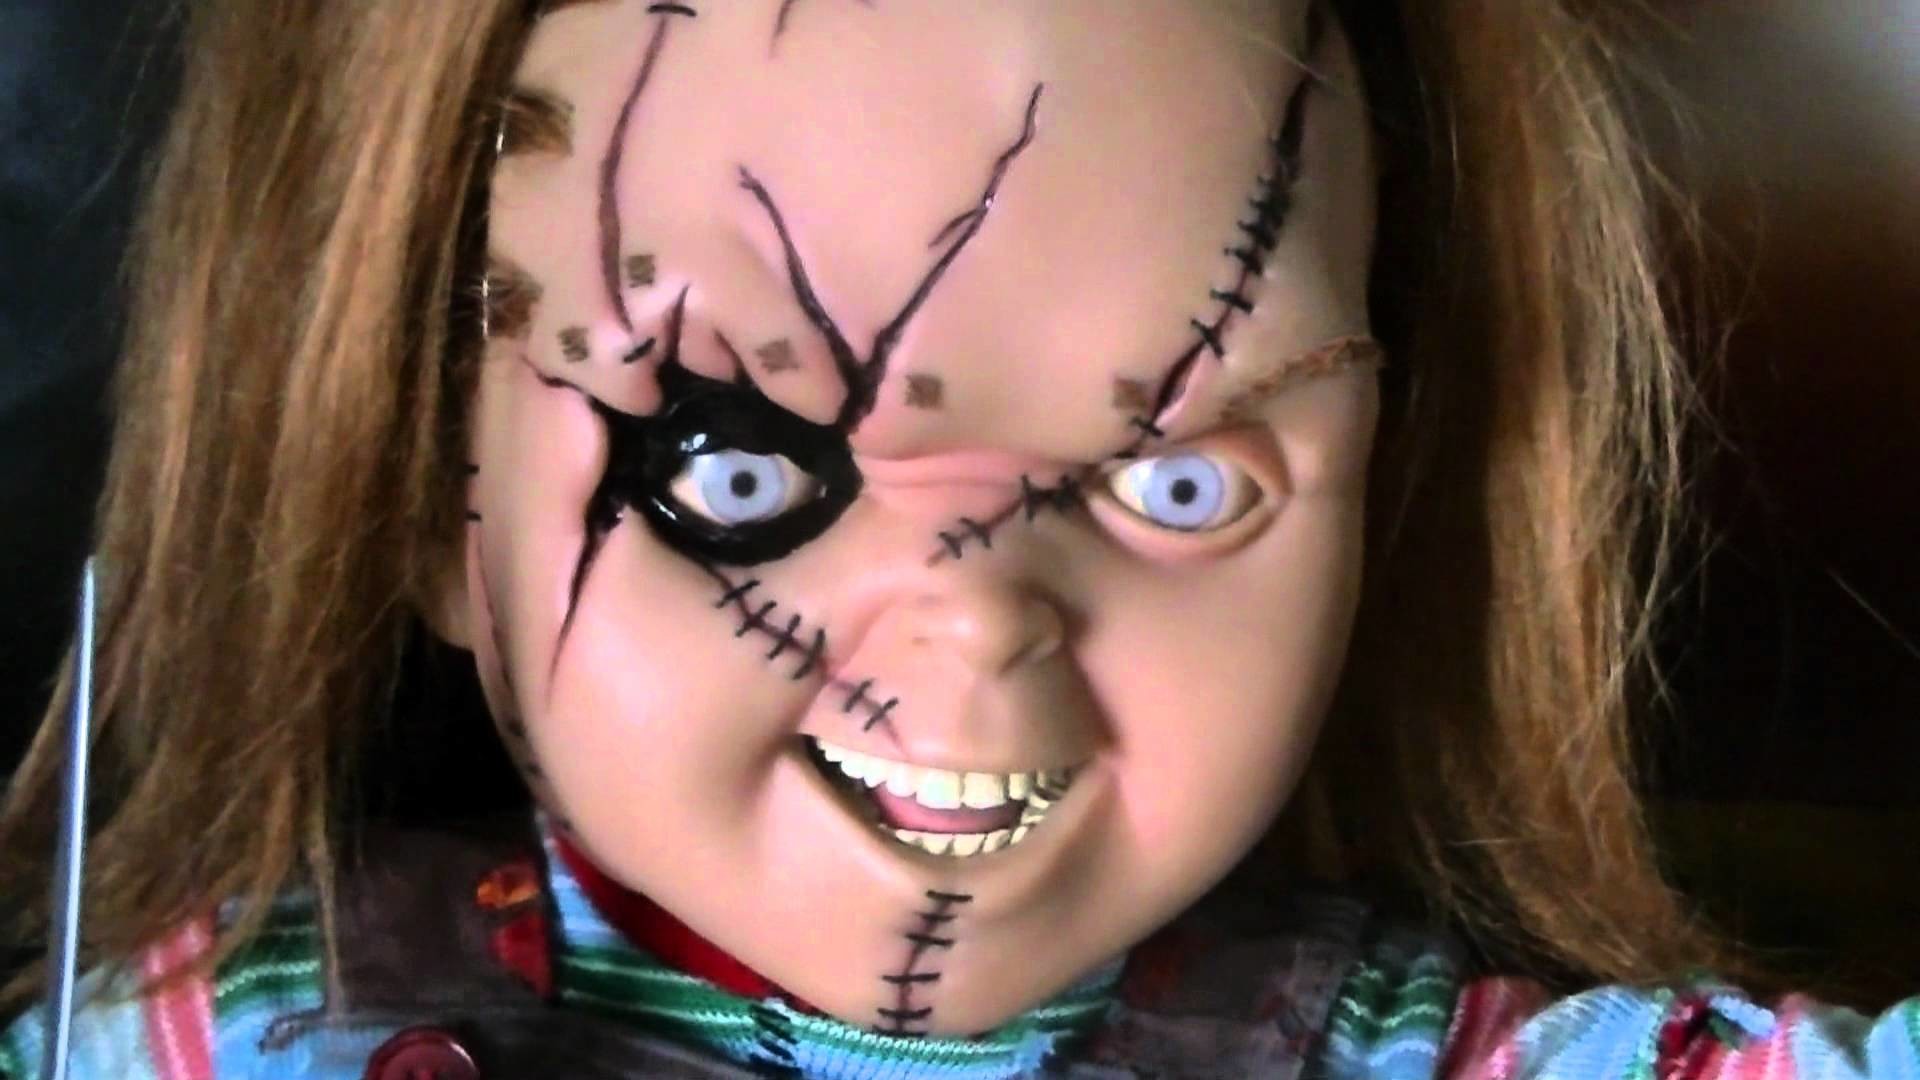 Sideshow Chucky doll – favorite item